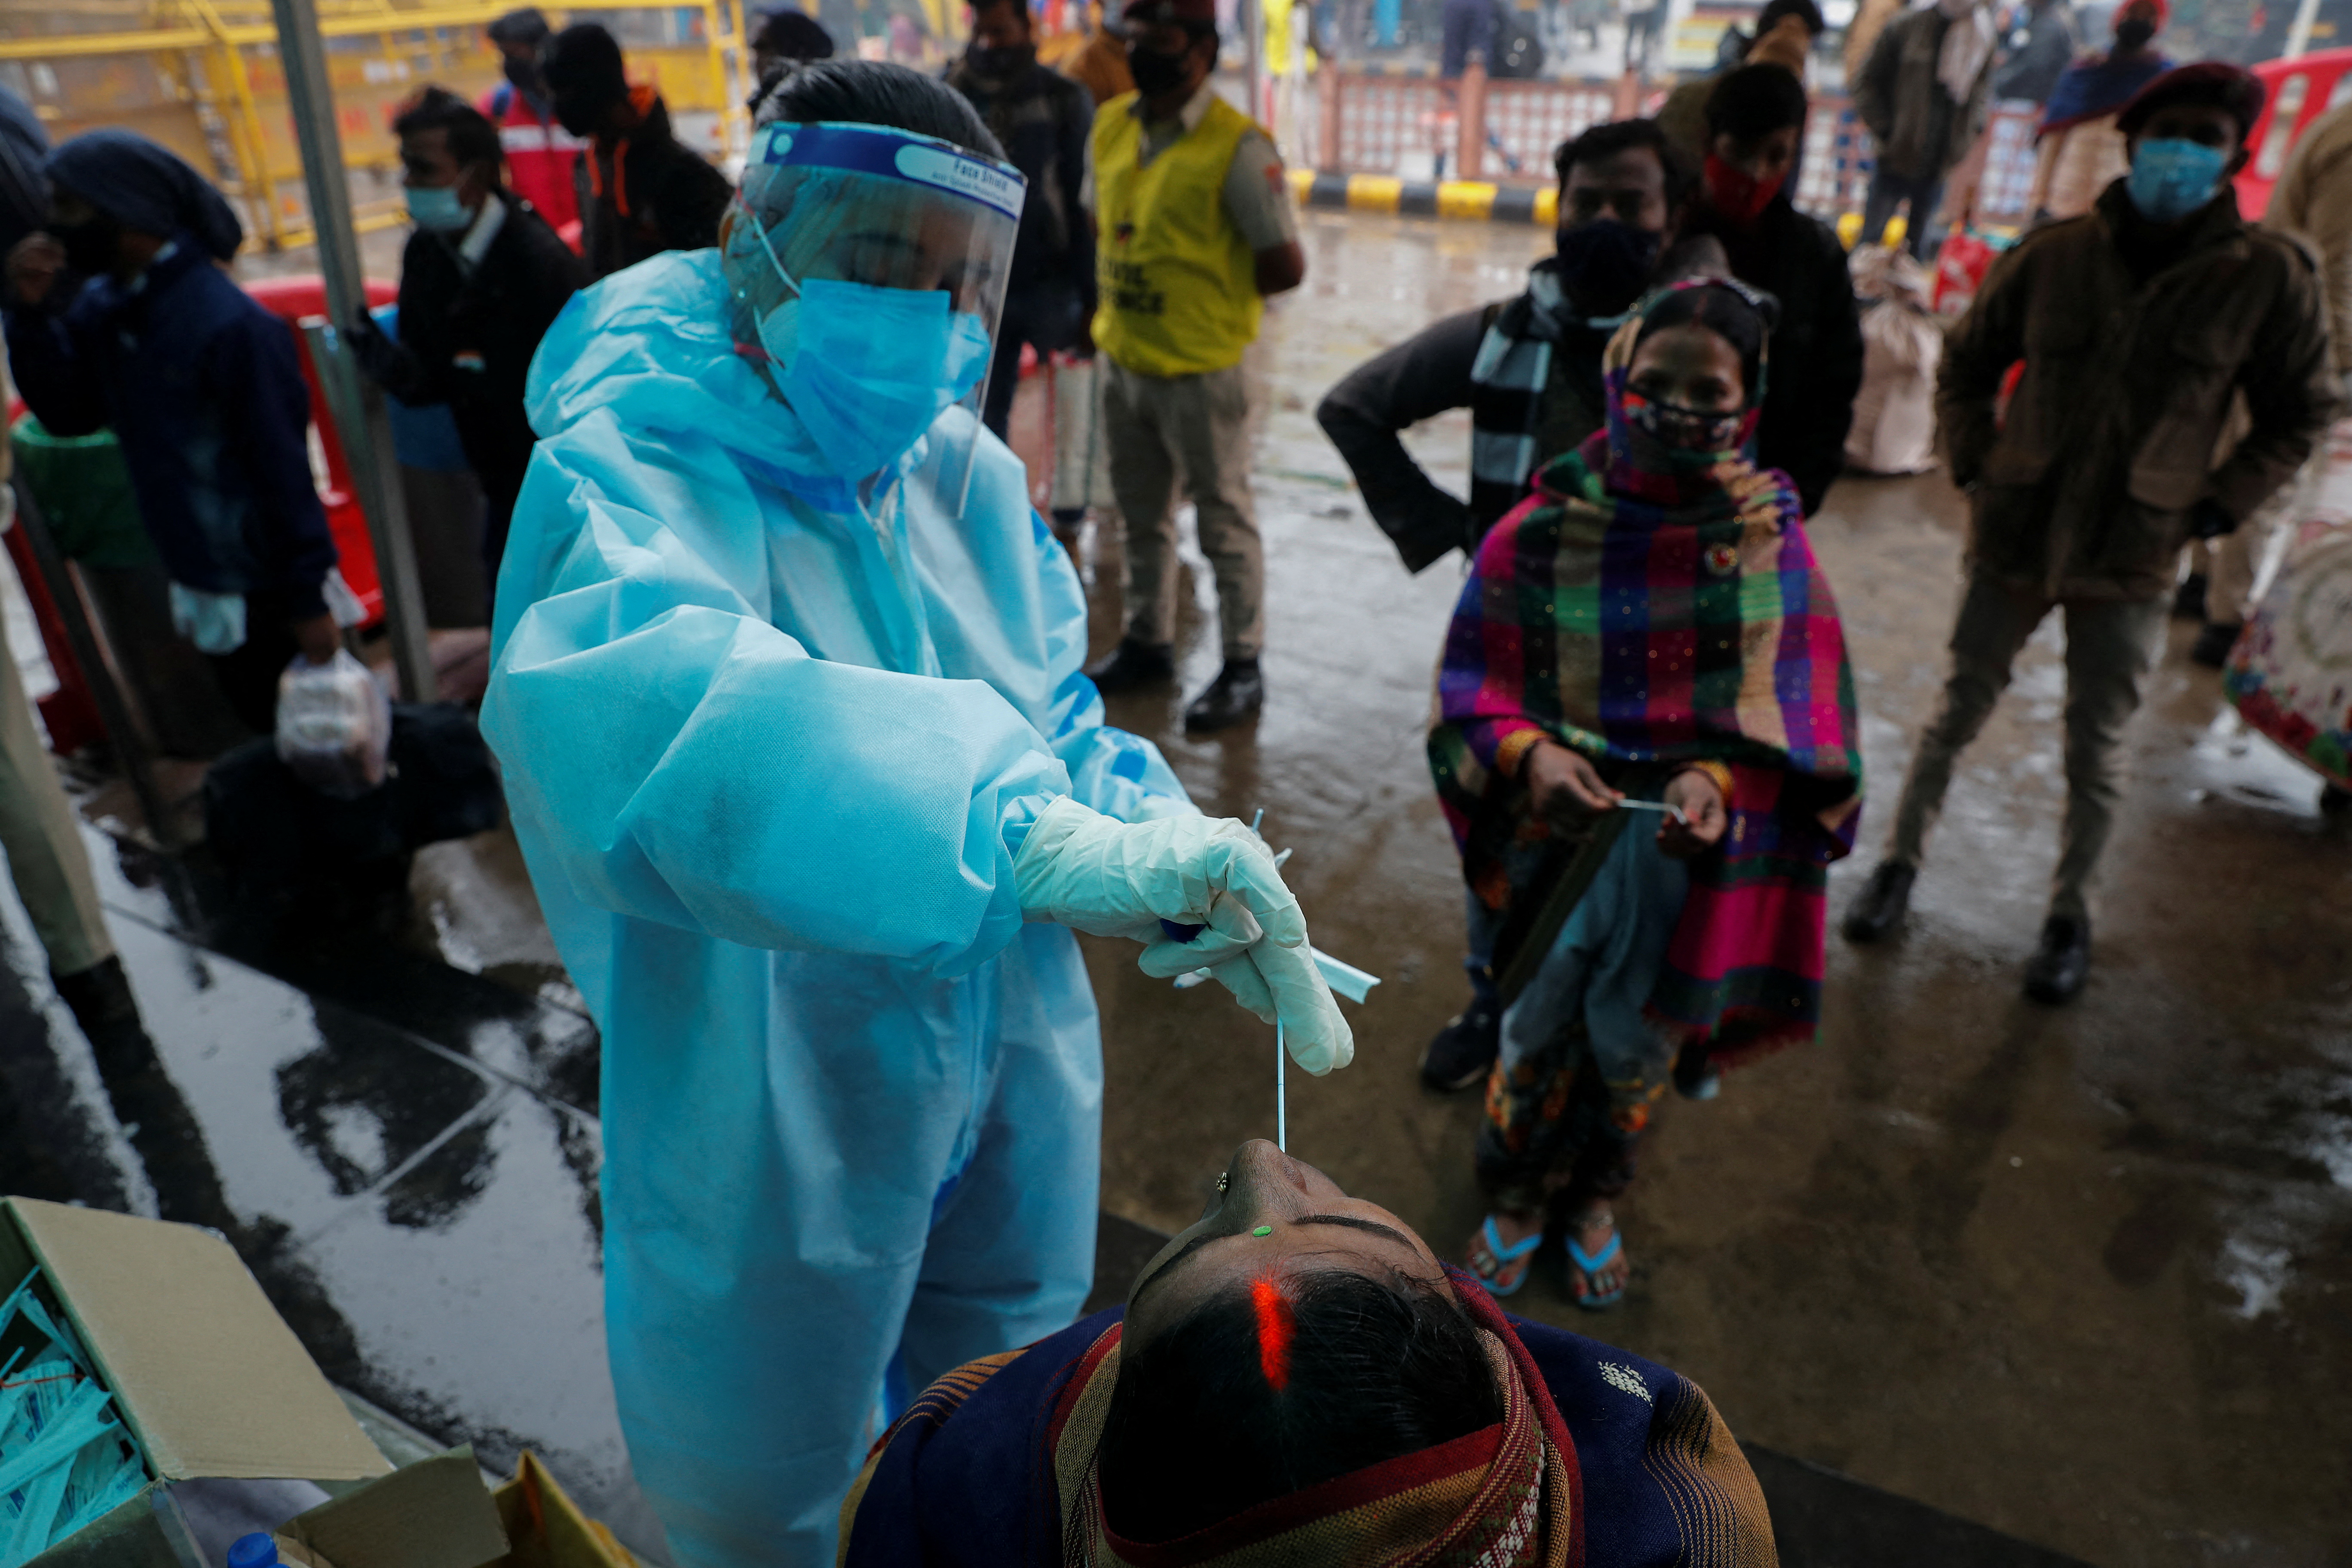 Healthcare worker collects COVID-19 test swab samples from people at a railway station in New Delhi